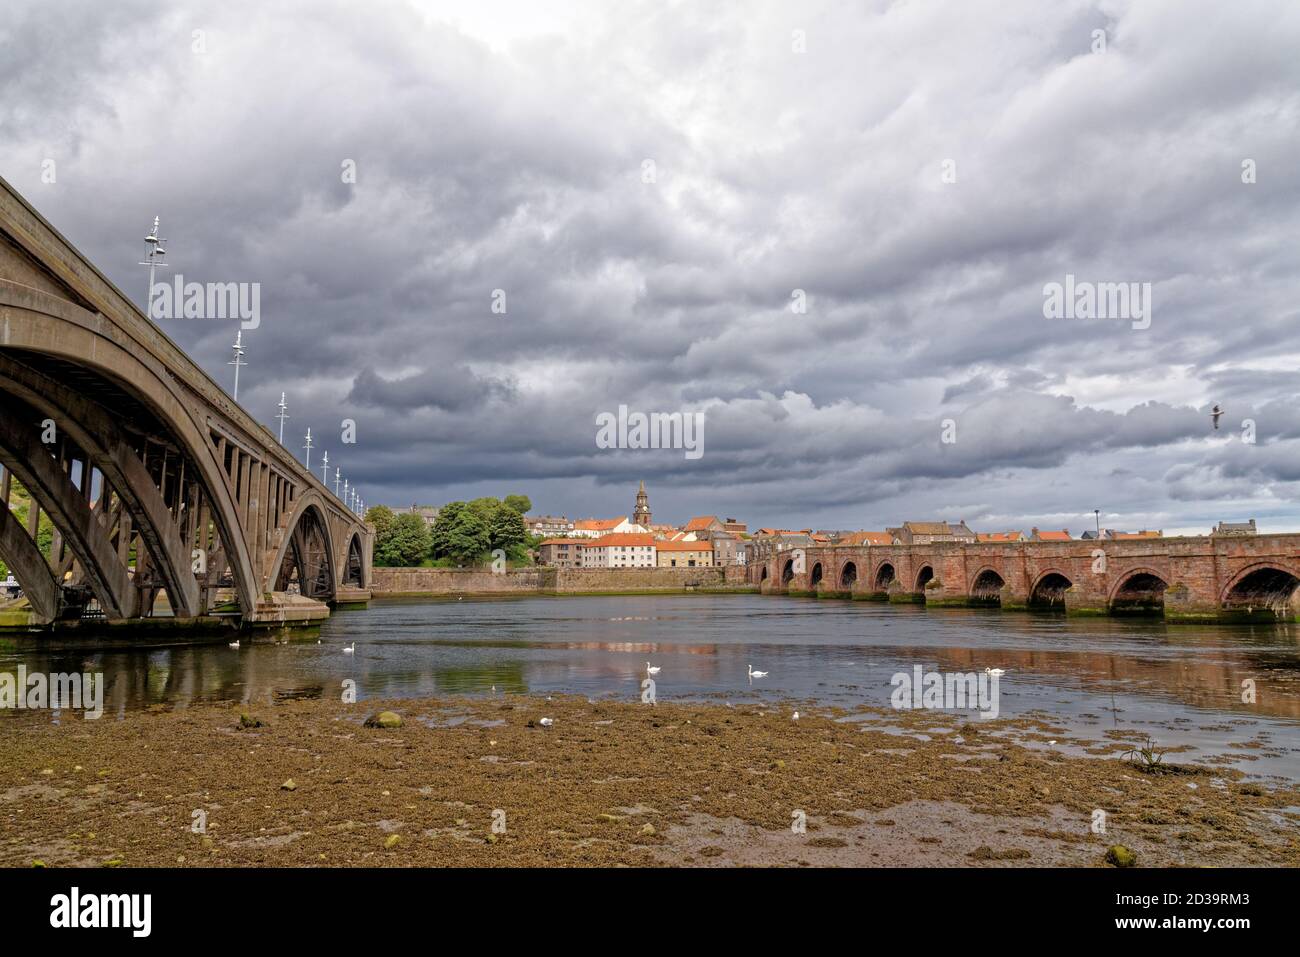 The Royal Tweed Bridge in Berwick Upon Tweed Northumberland England UK built 1928 and carried the old A1 road through the town Stock Photo